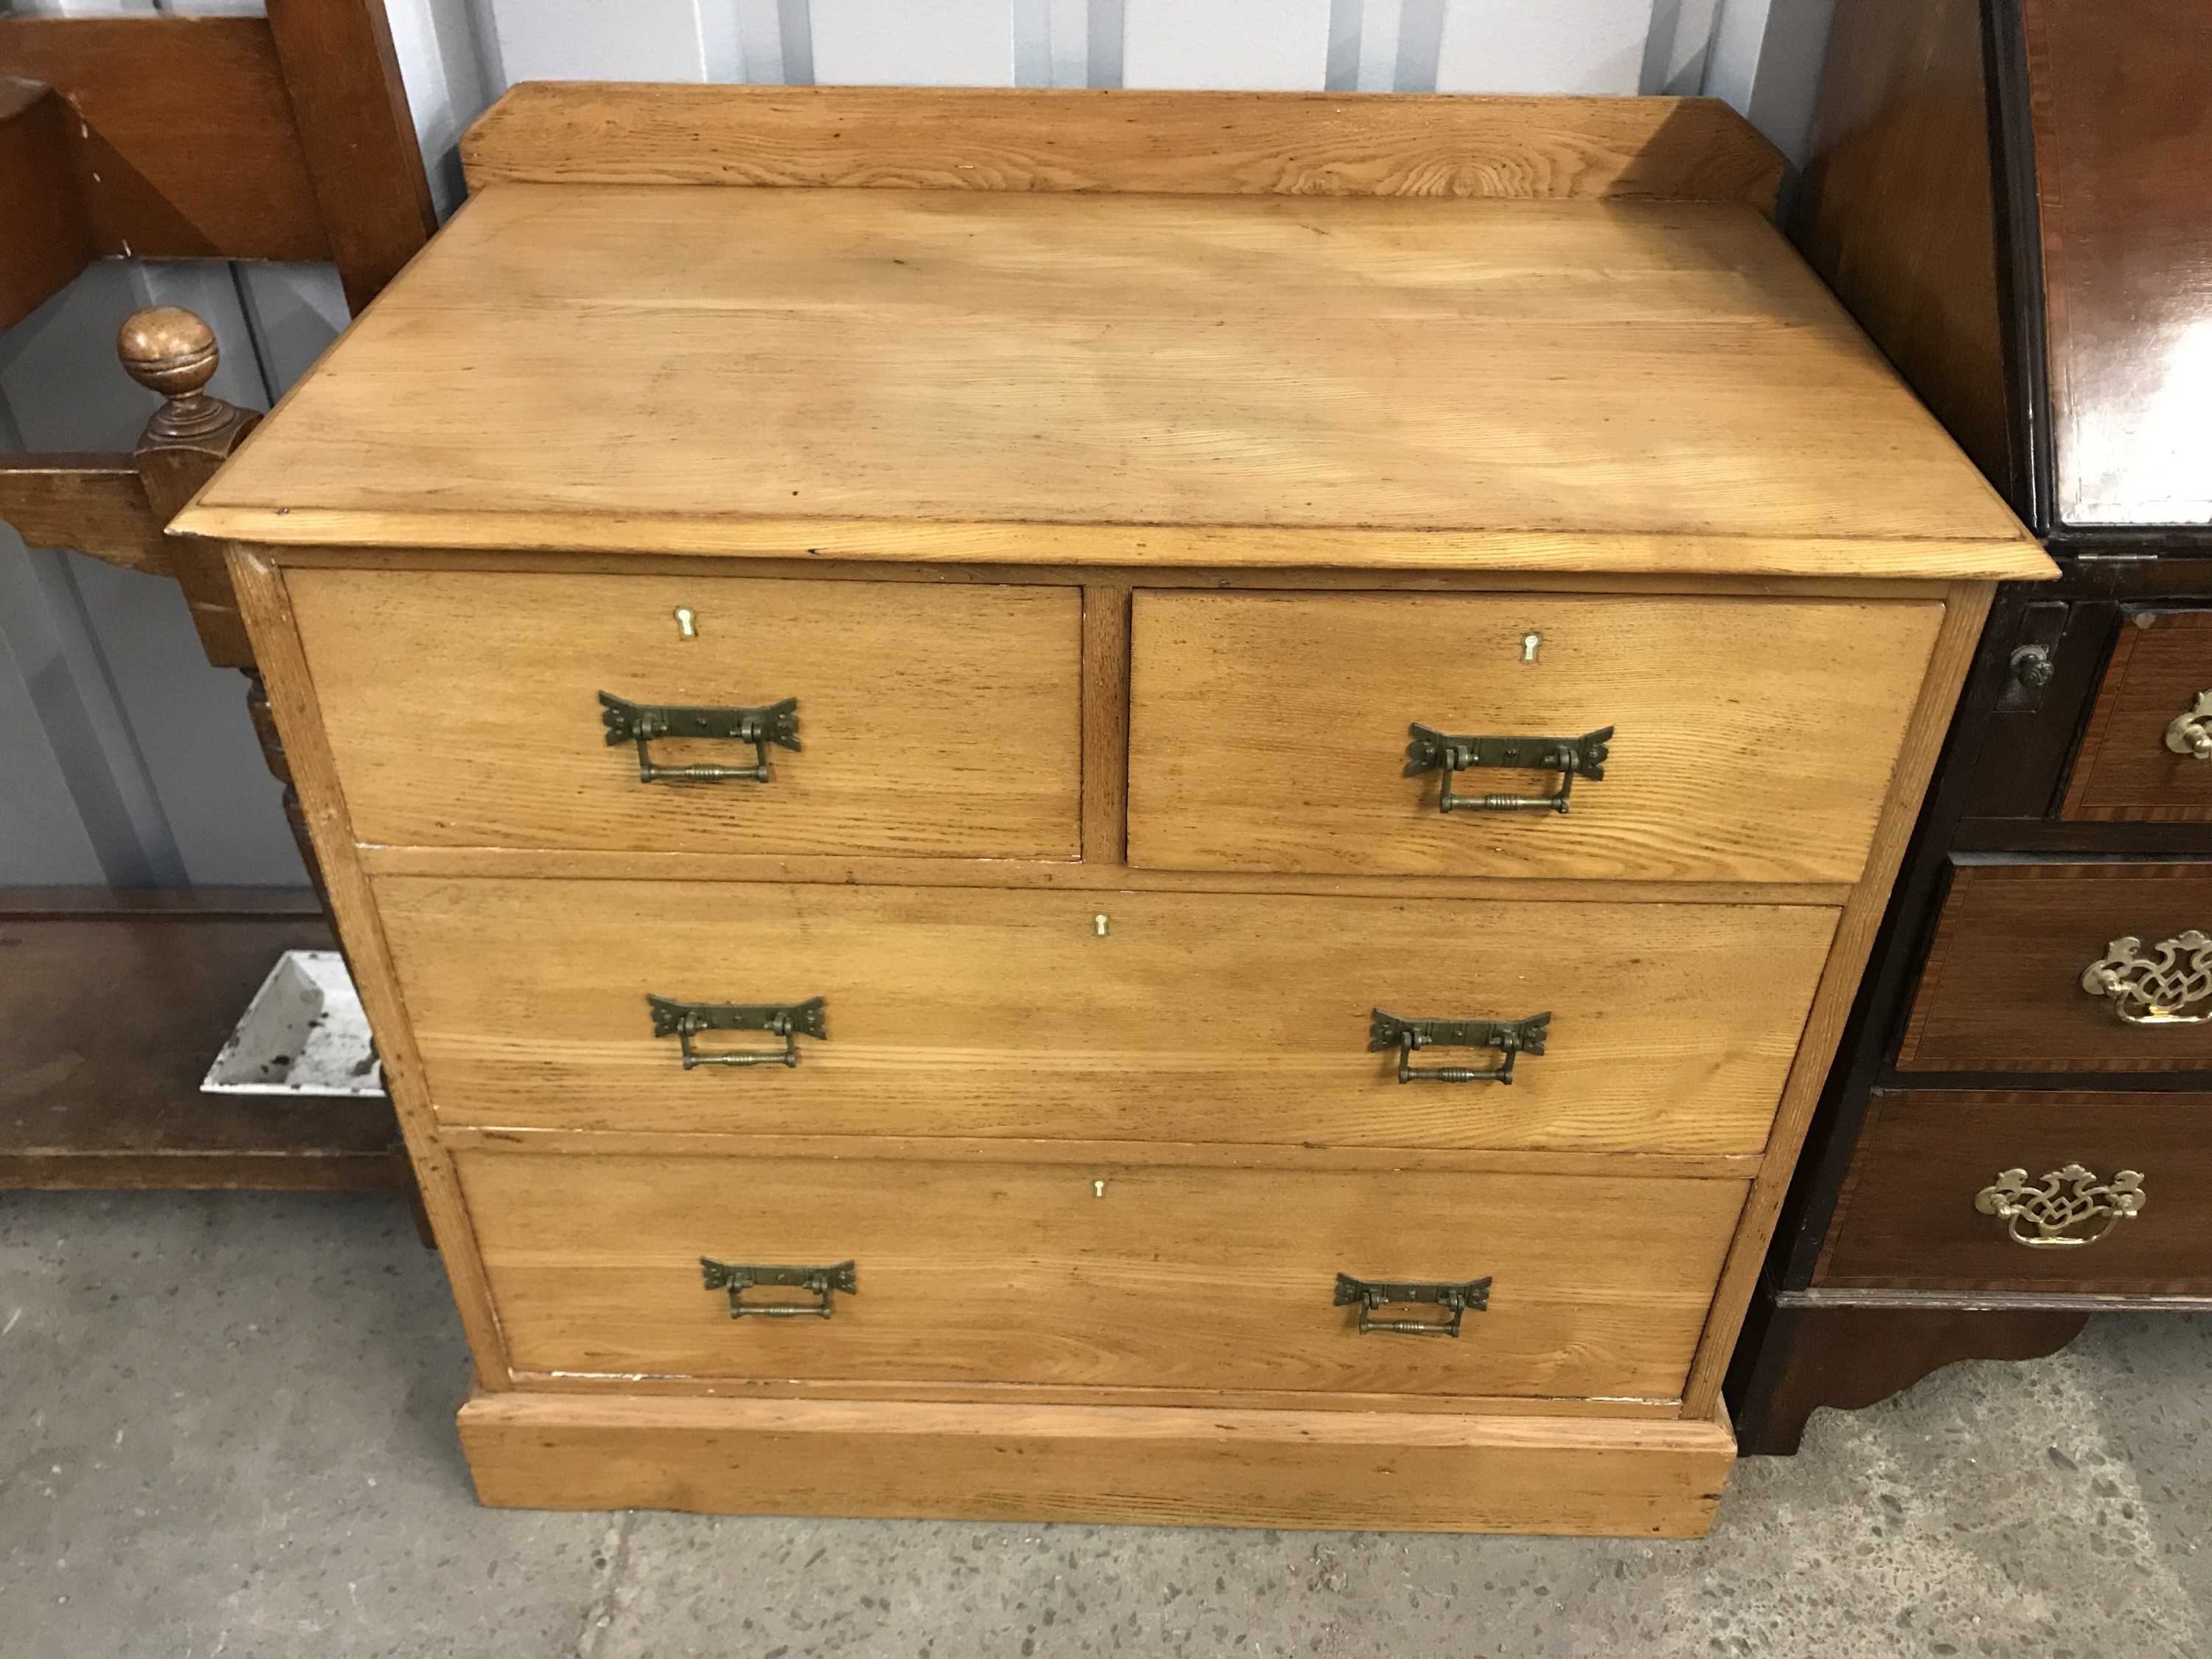 A Victorian stripped-pine chest